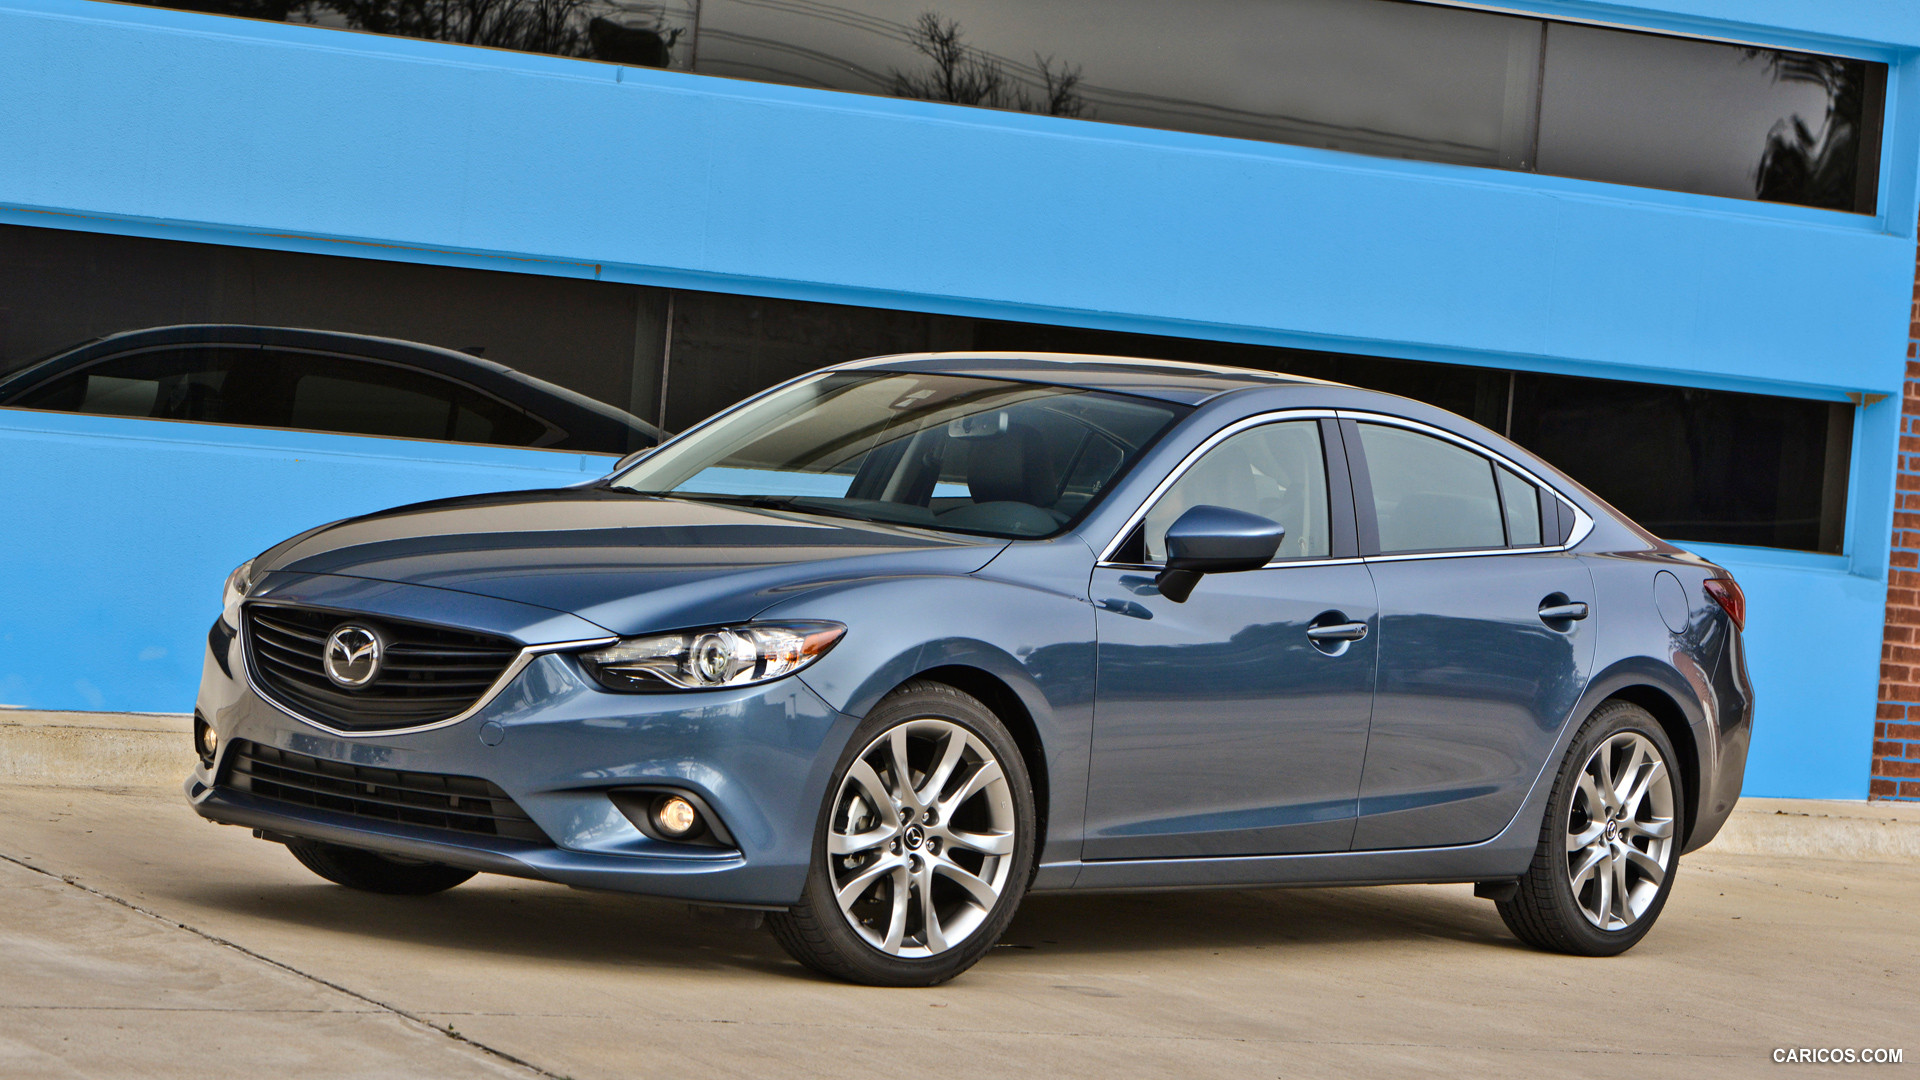 2014 Mazda6 GT - Front, #138 of 179